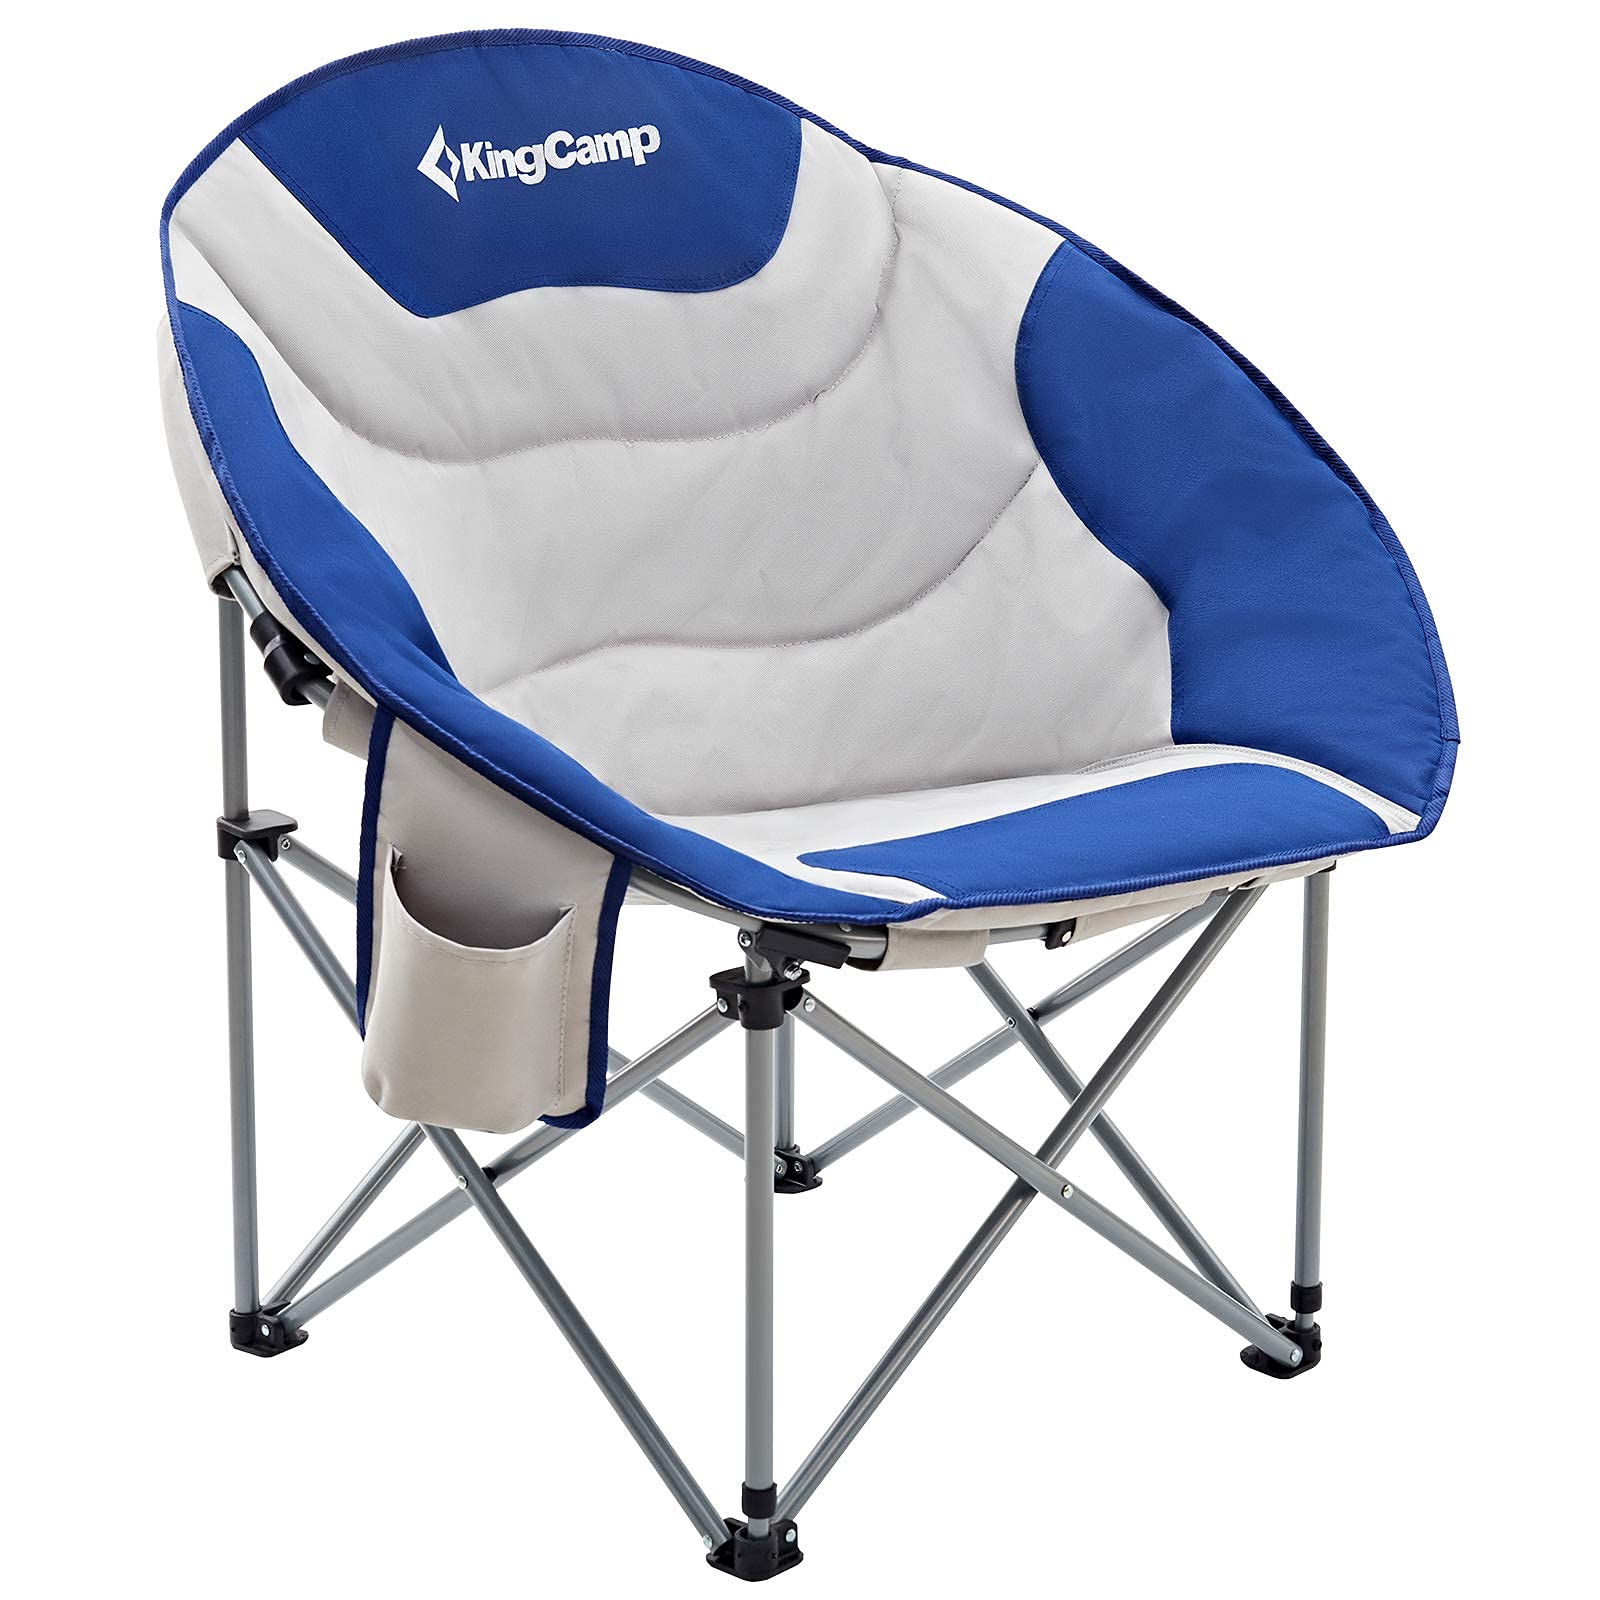 KingCamp Moon Saucer Leisure Heavy Duty Steel Camping Chair Padded Seat with Cup Holder and Cooler Bag BlueGrey One Size並